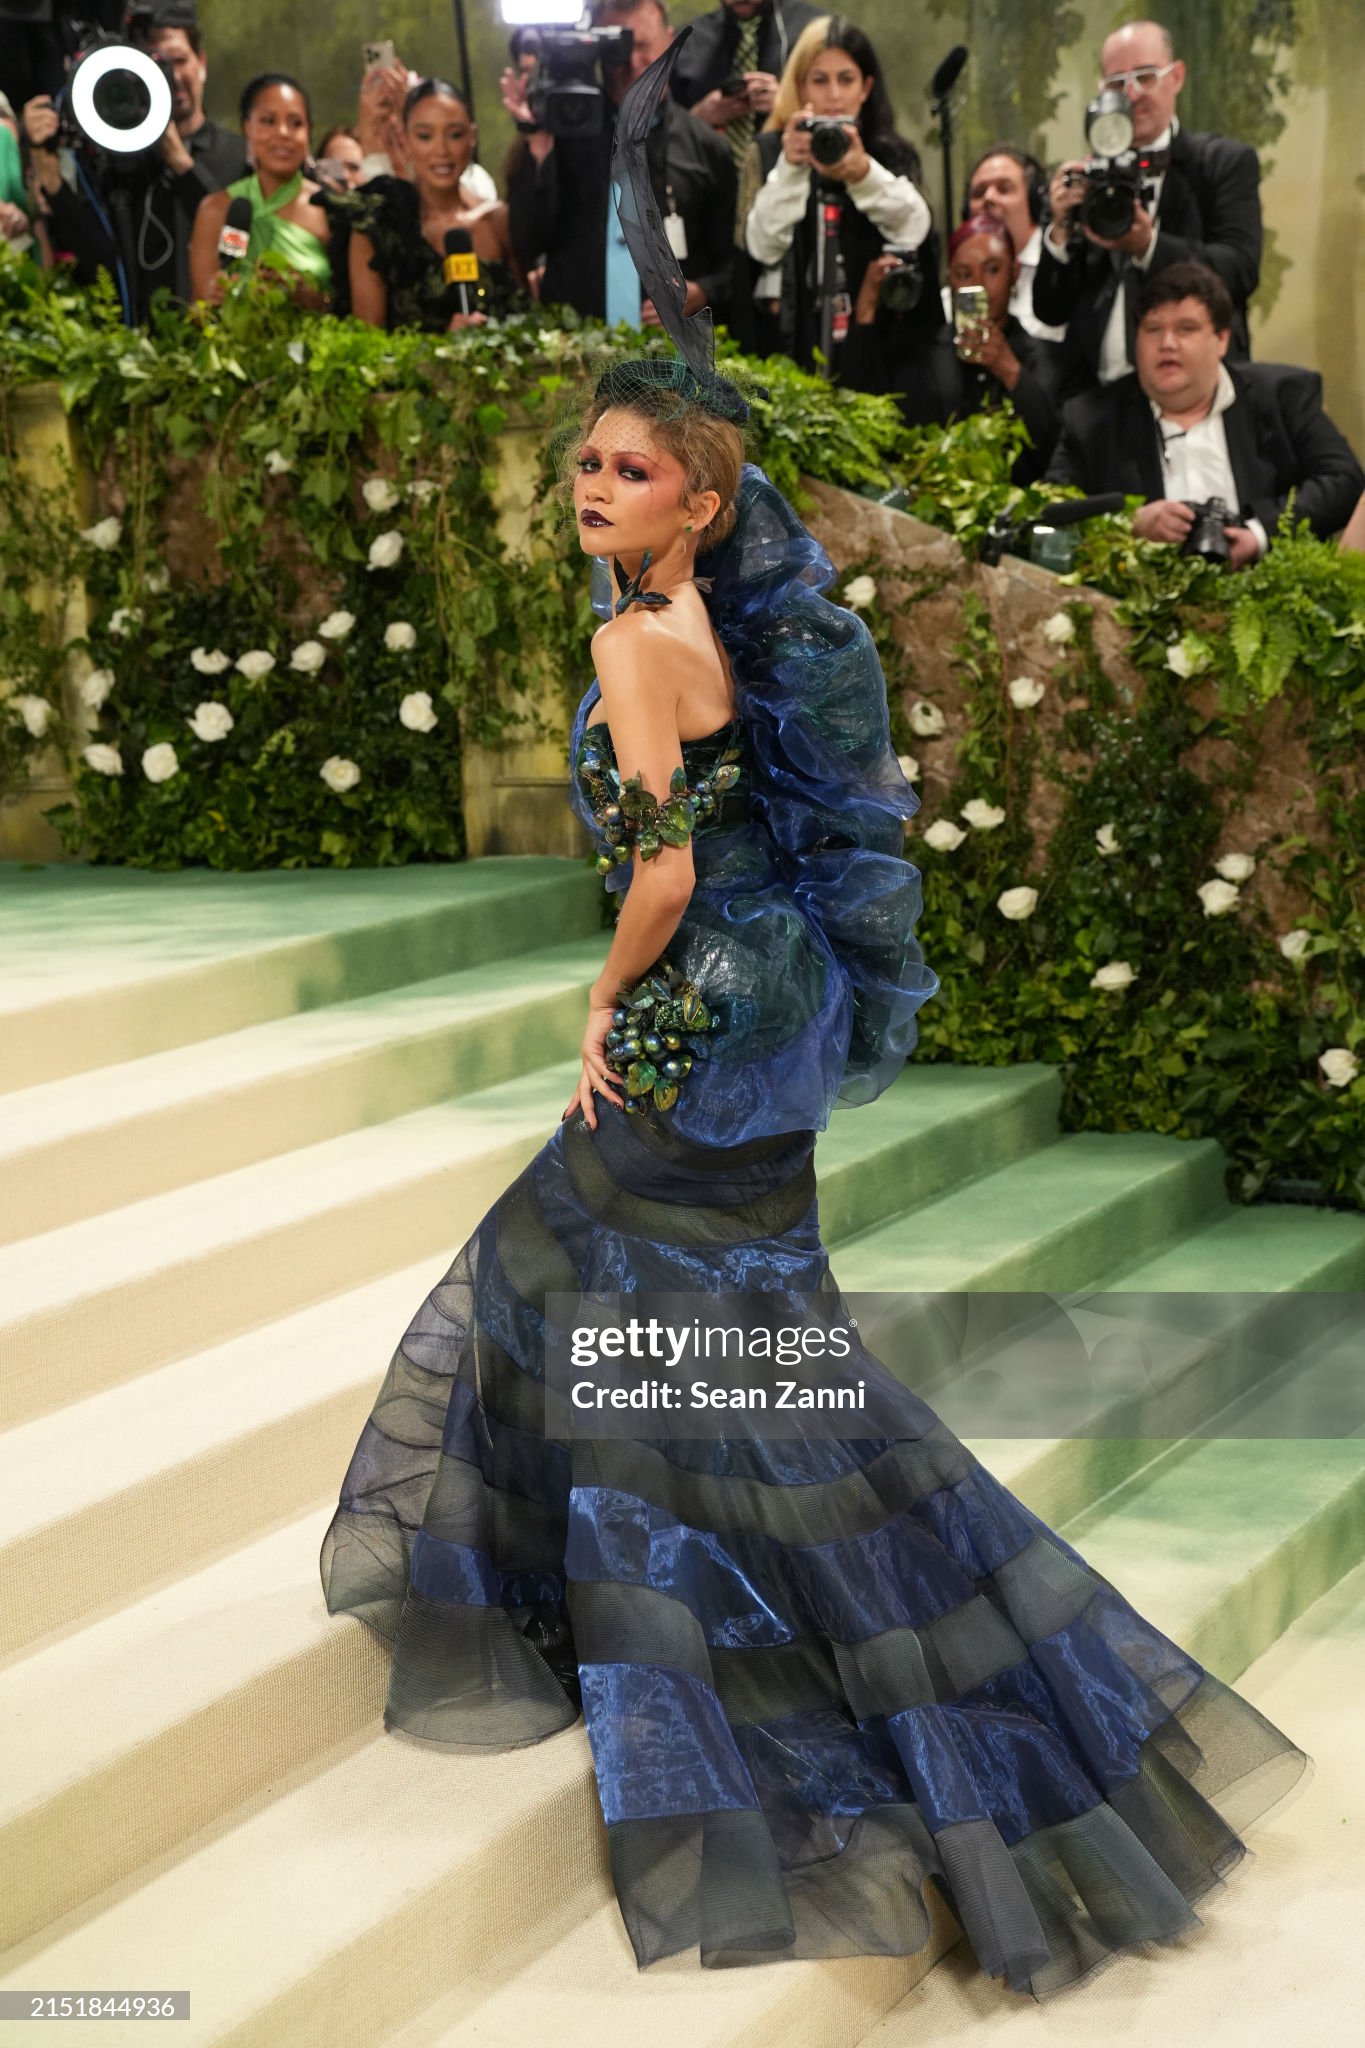 gettyimages-2151844936-2048x2048.jpg